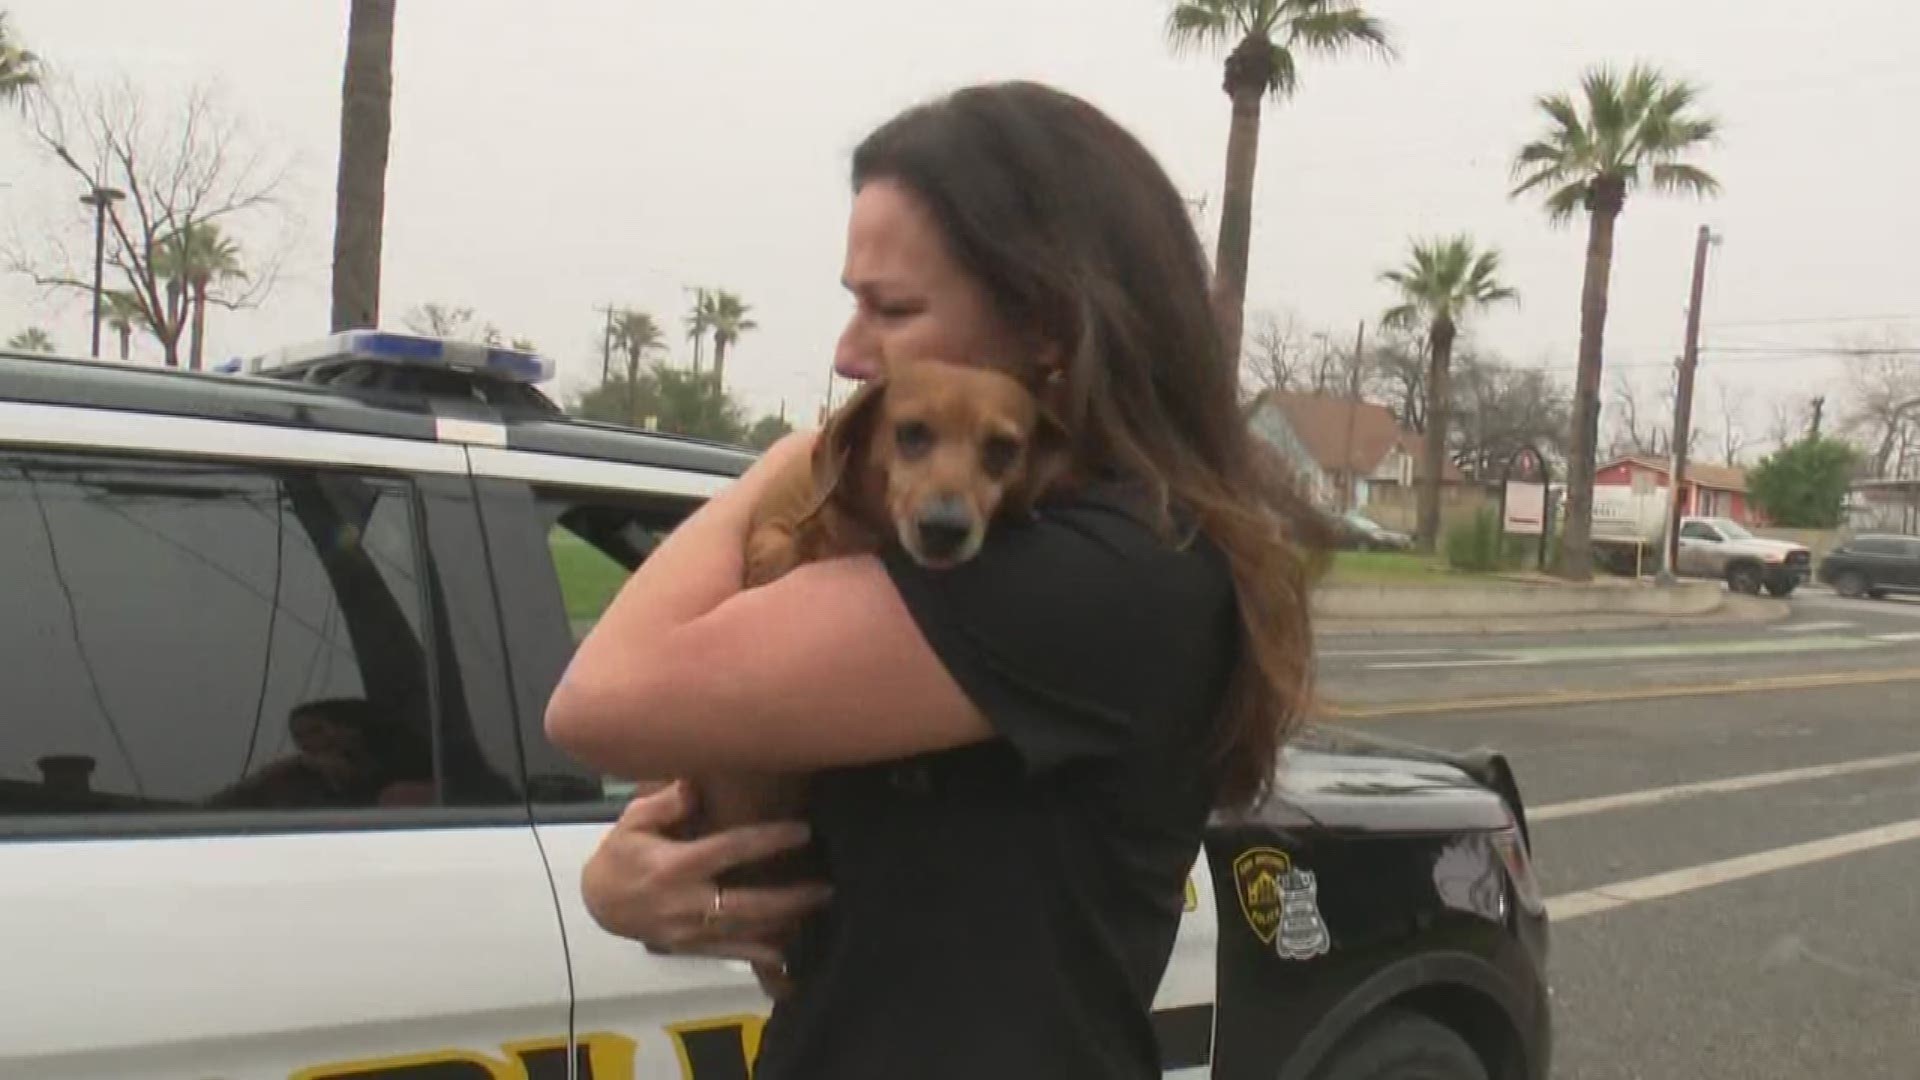 Technology played a role in helping San Antonio police recover a stolen car and dog.